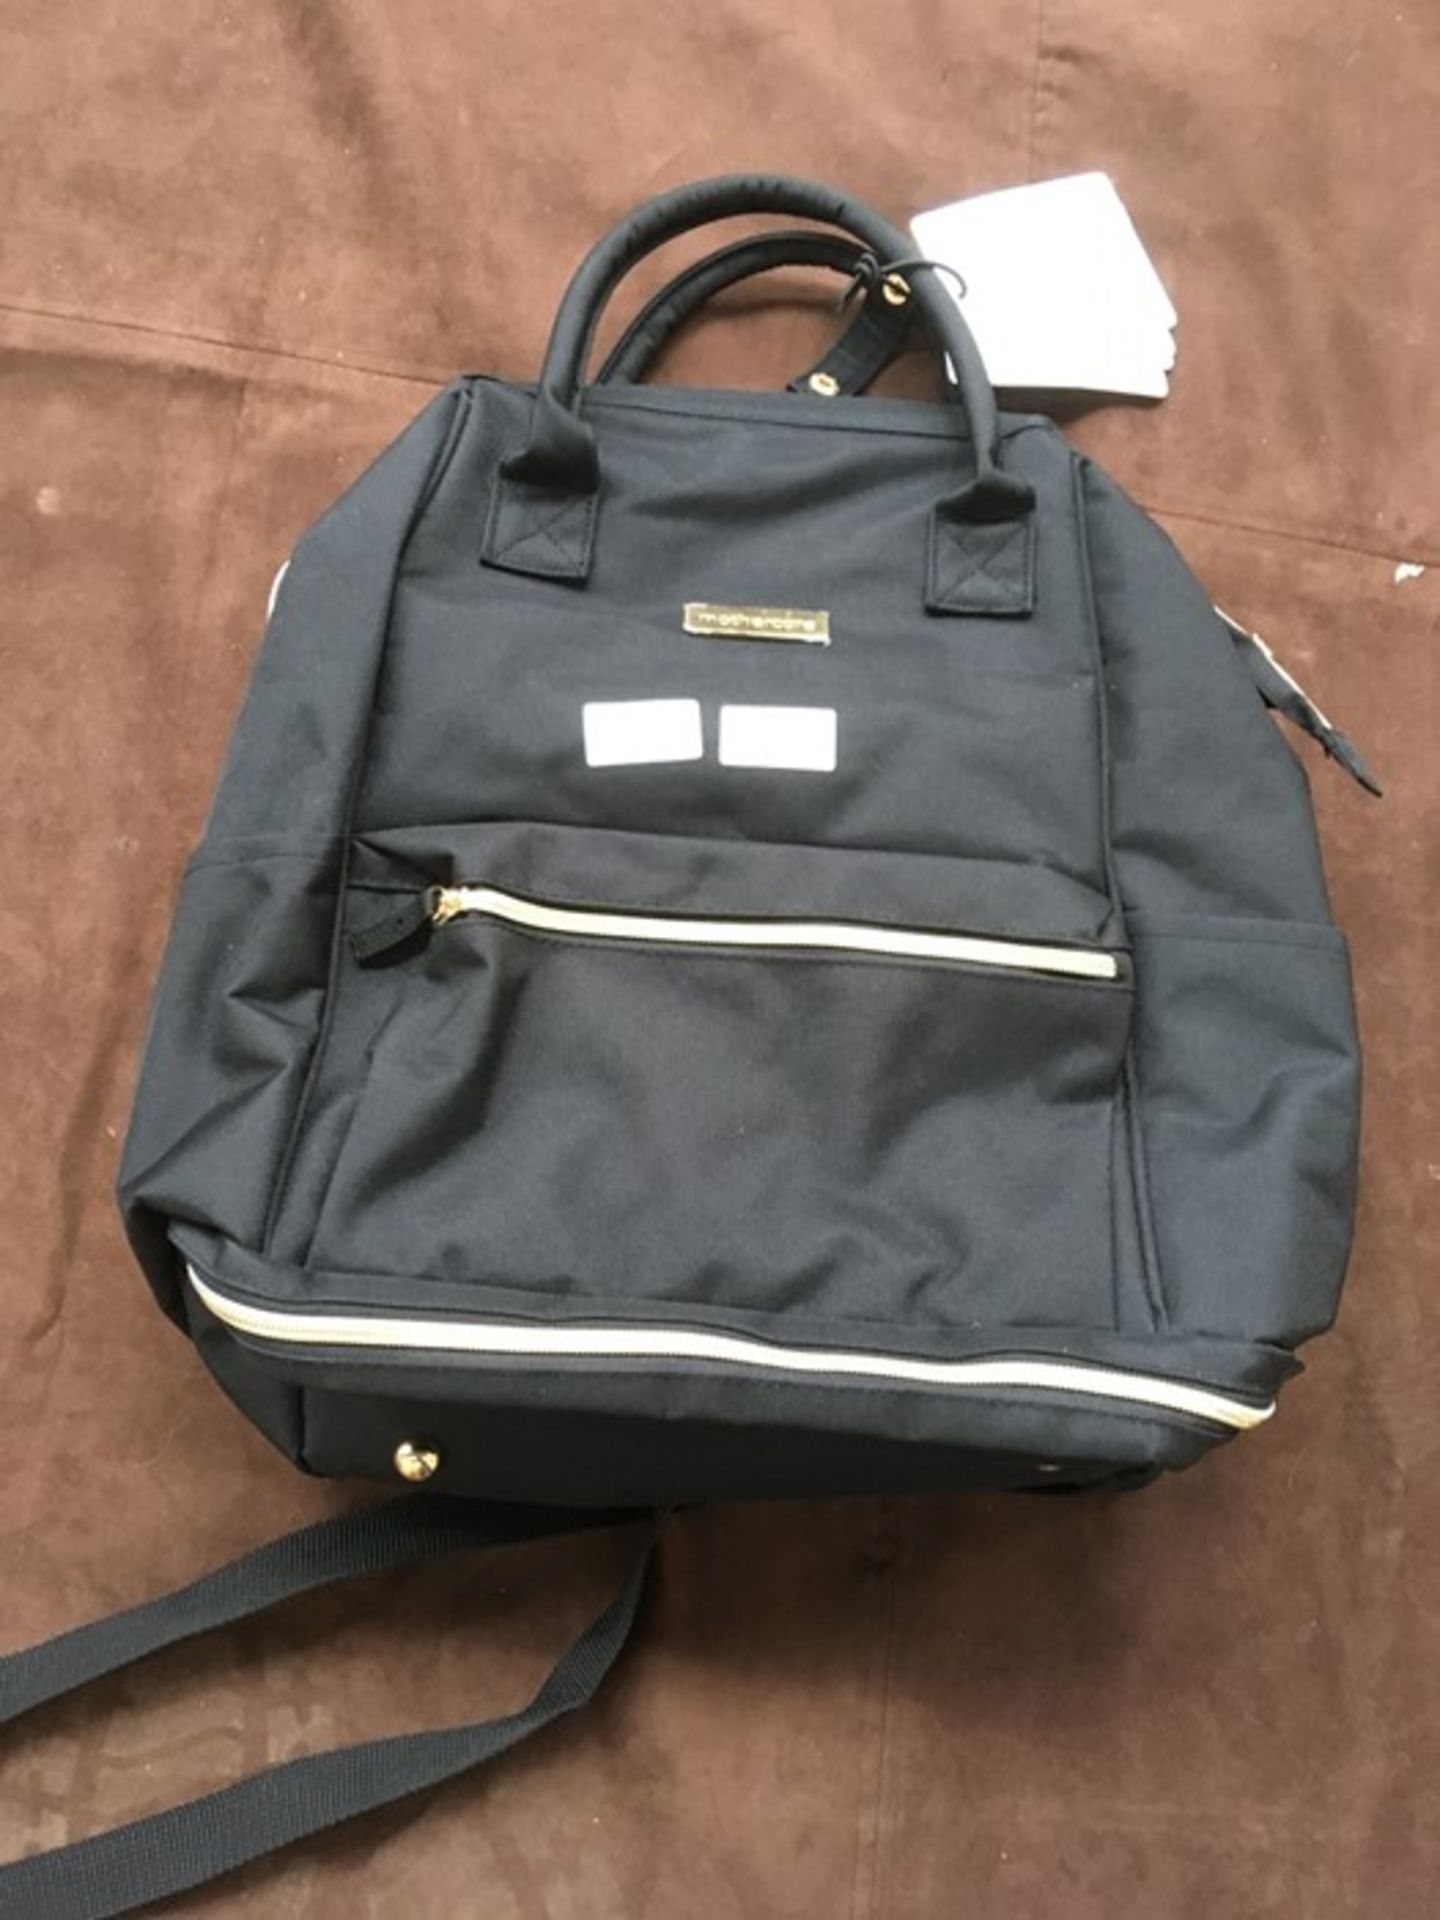 1 MOTHERCARE BAY RUCKSACK CLASSIC / RRP £50.00 (PUBLIC VIEWING AVAILABLE)